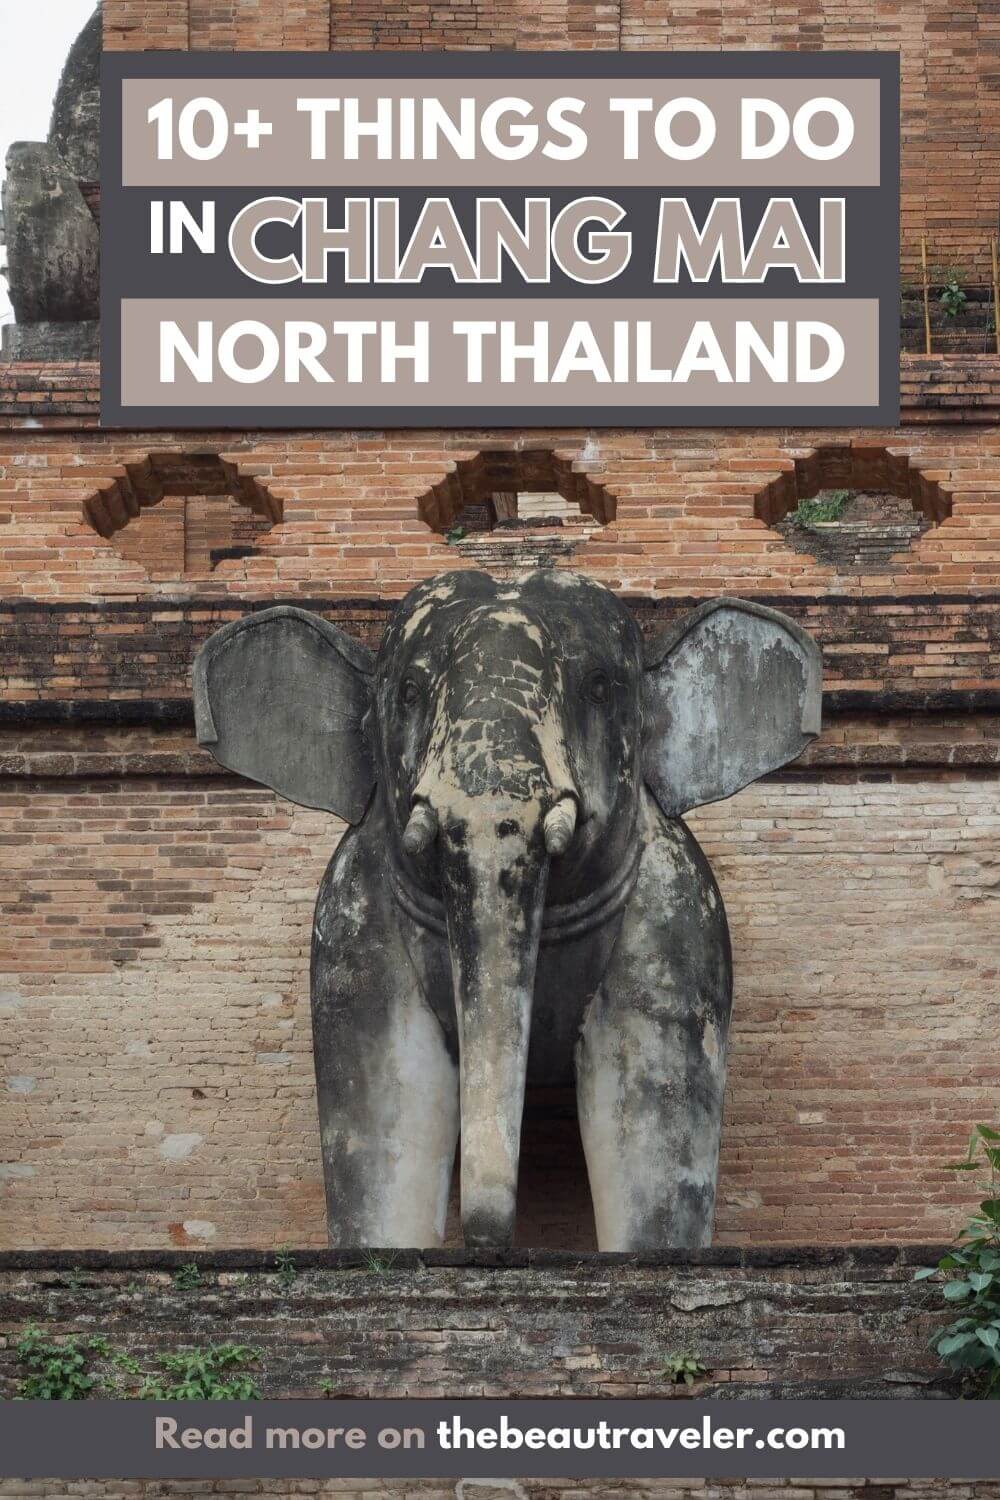 North Thailand Travel Guide: 15 Best Things to Do in Chiang Mai - The BeauTraveler